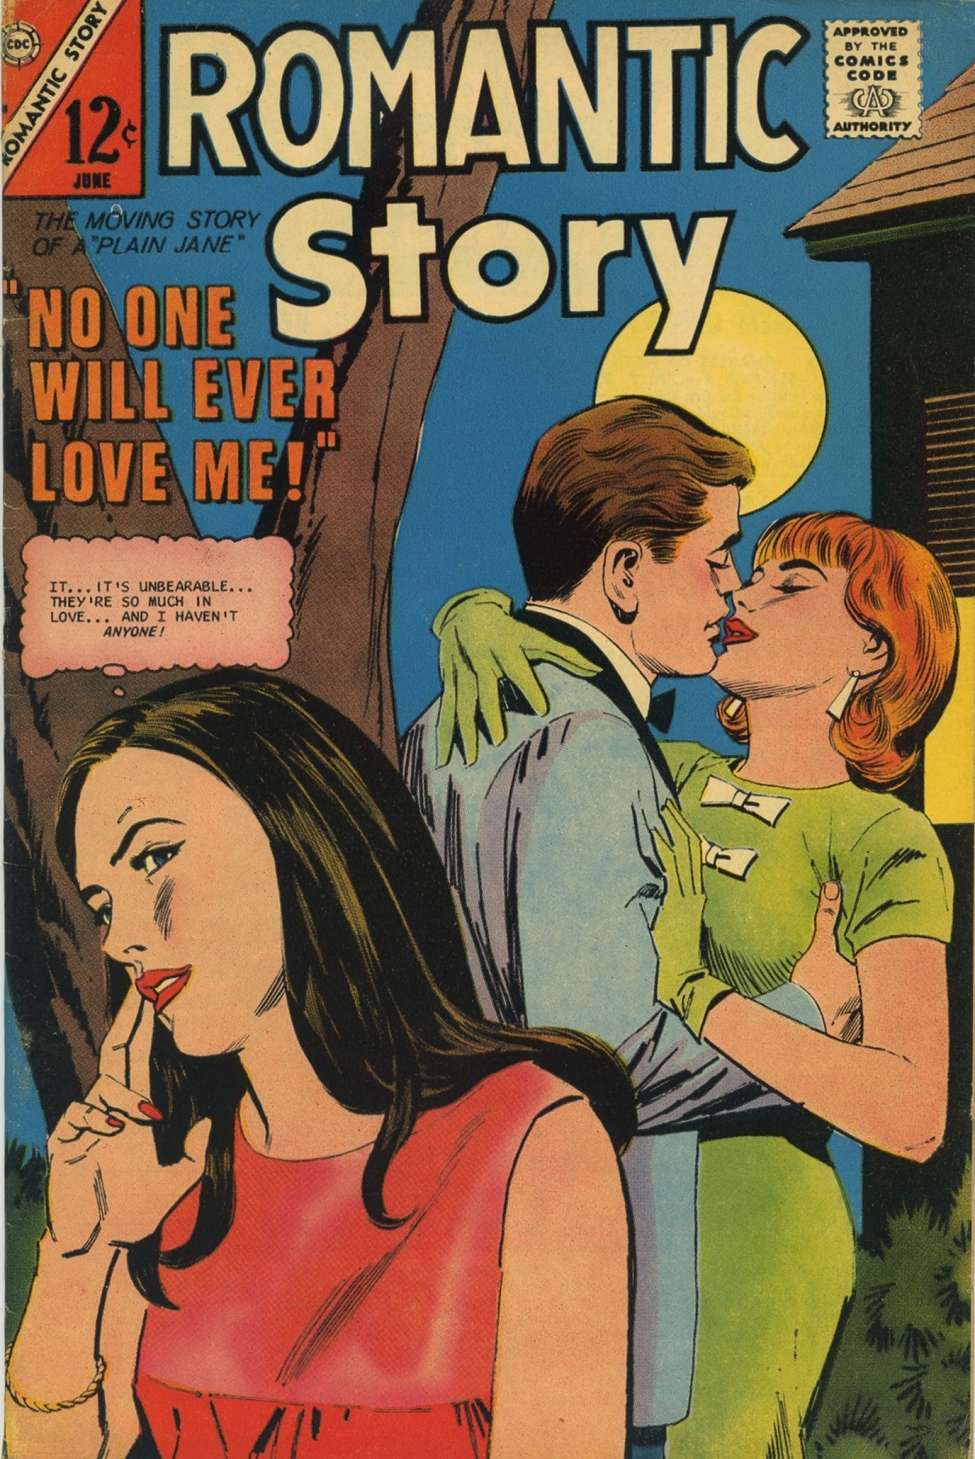 Book Cover For Romantic Story 88